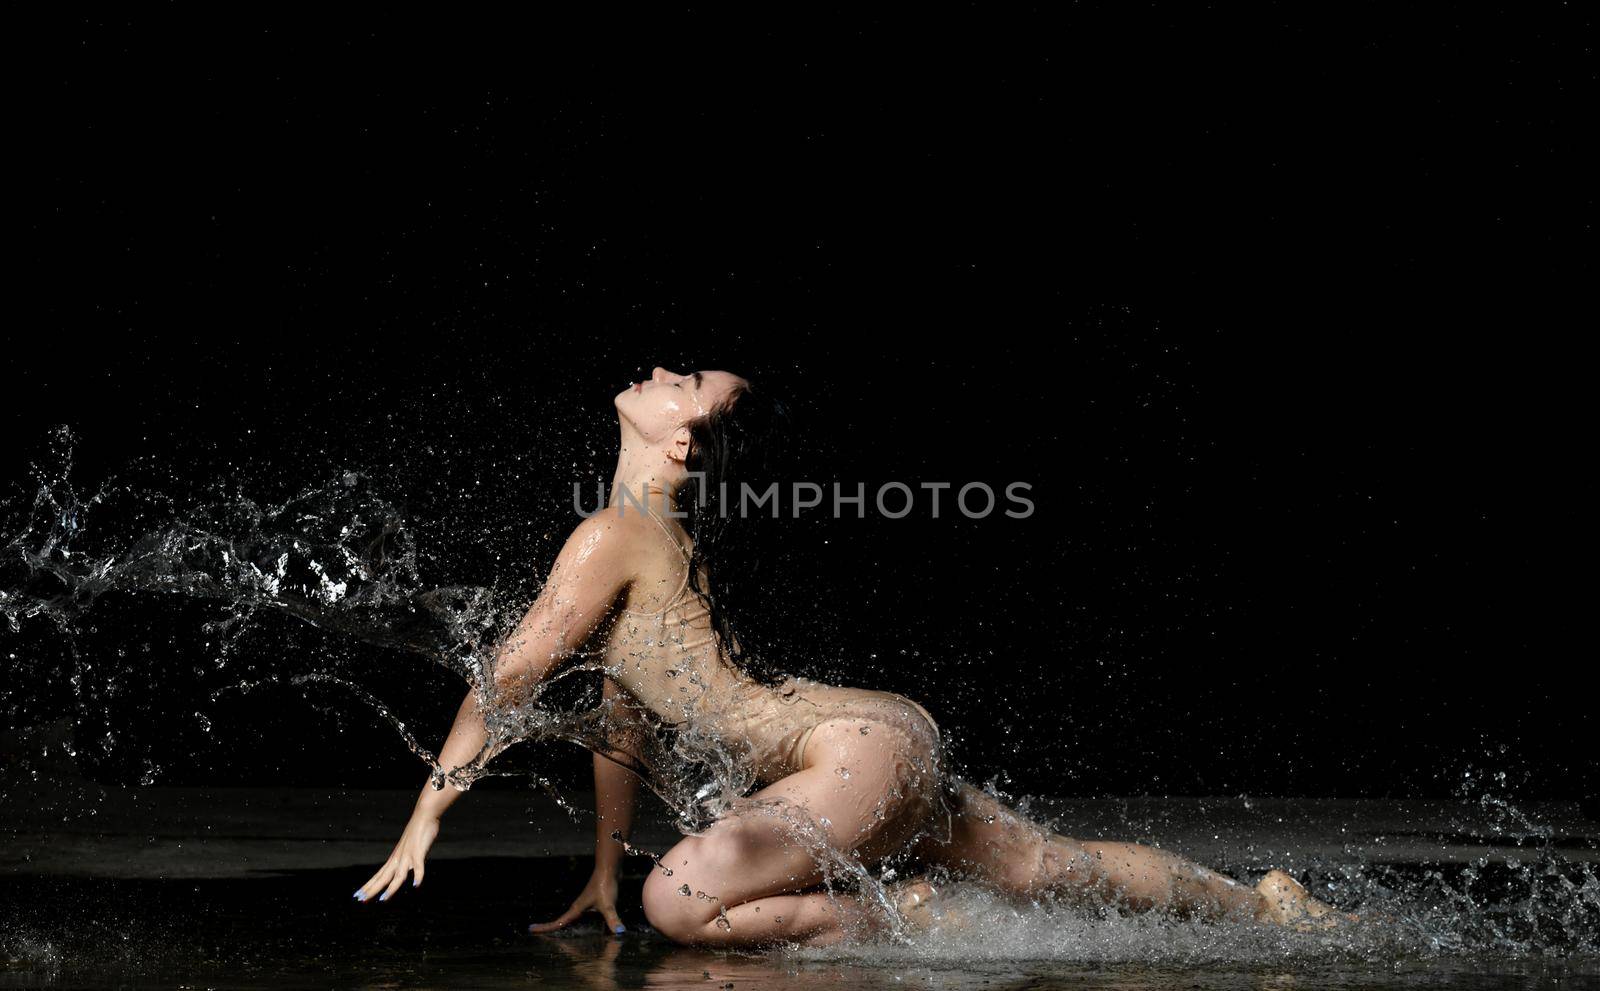 young woman with black long hair lies on the ground under raindrops on a black background. Woman dressed in beige bodysuit by ndanko